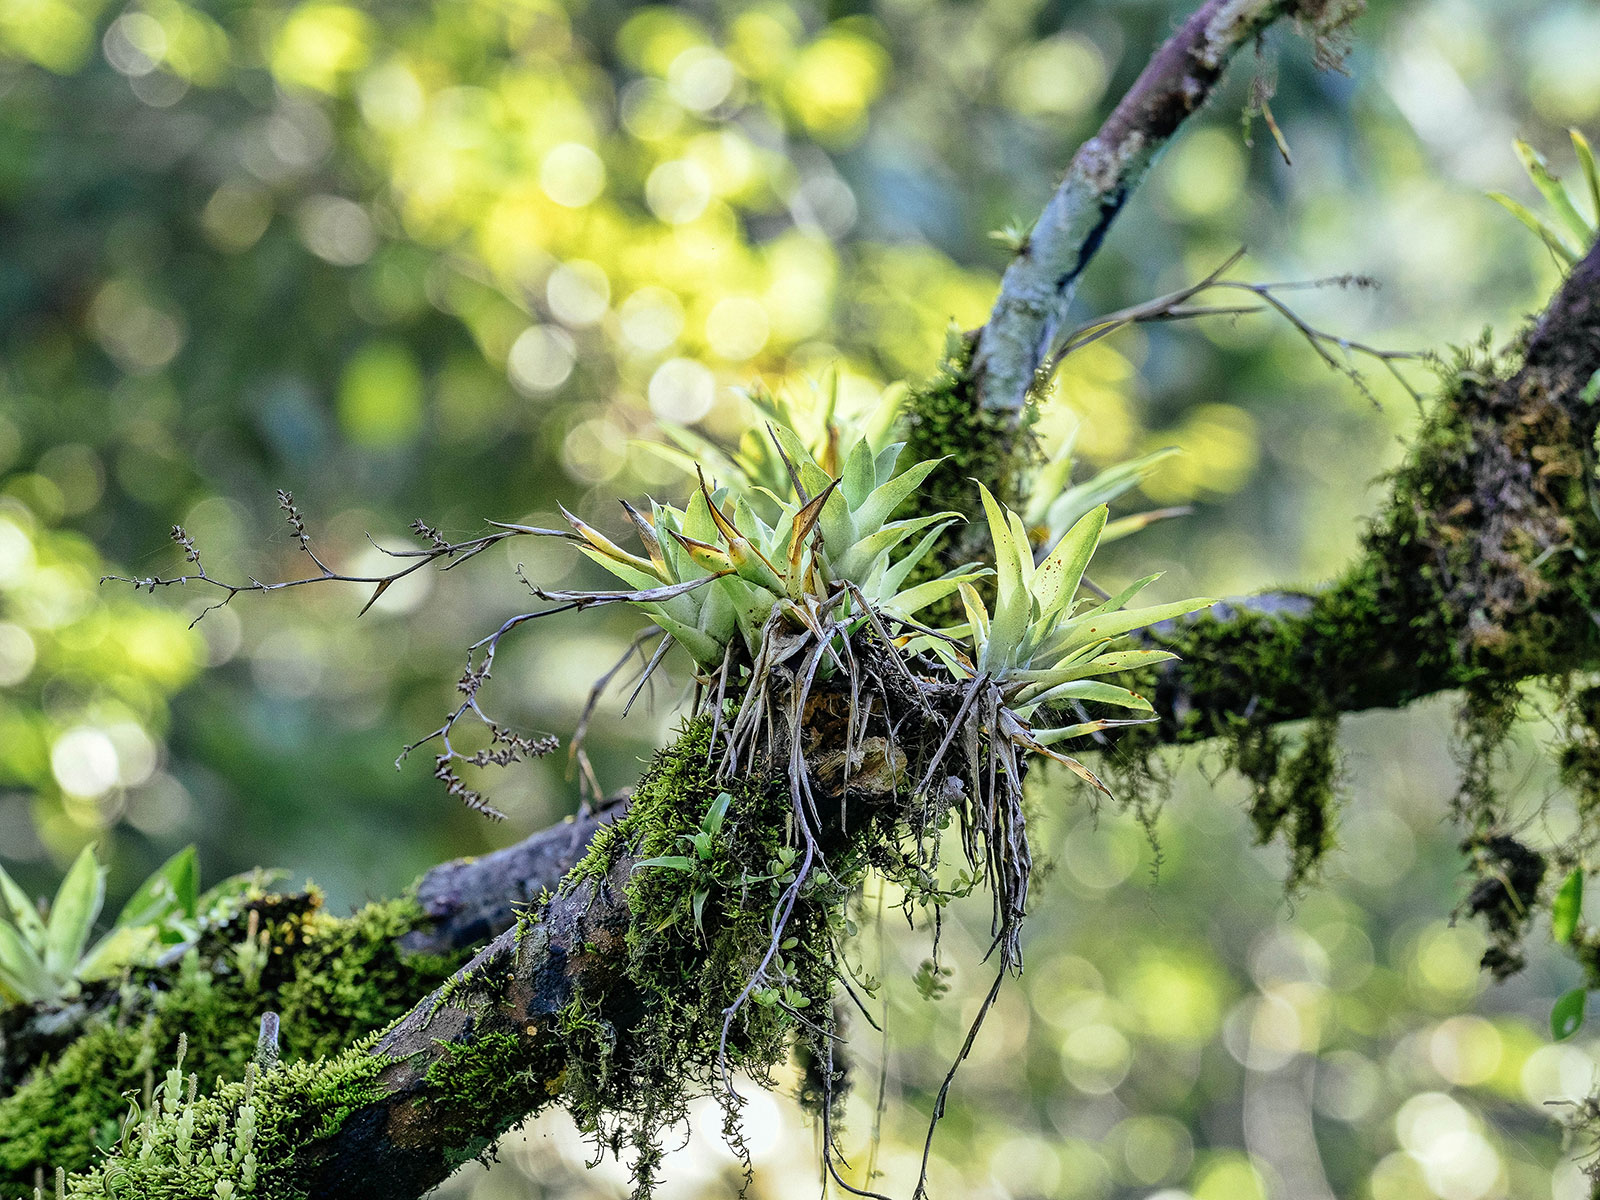 Epiphytic Tillandsia plants growing naturally in the wild on a tree branch